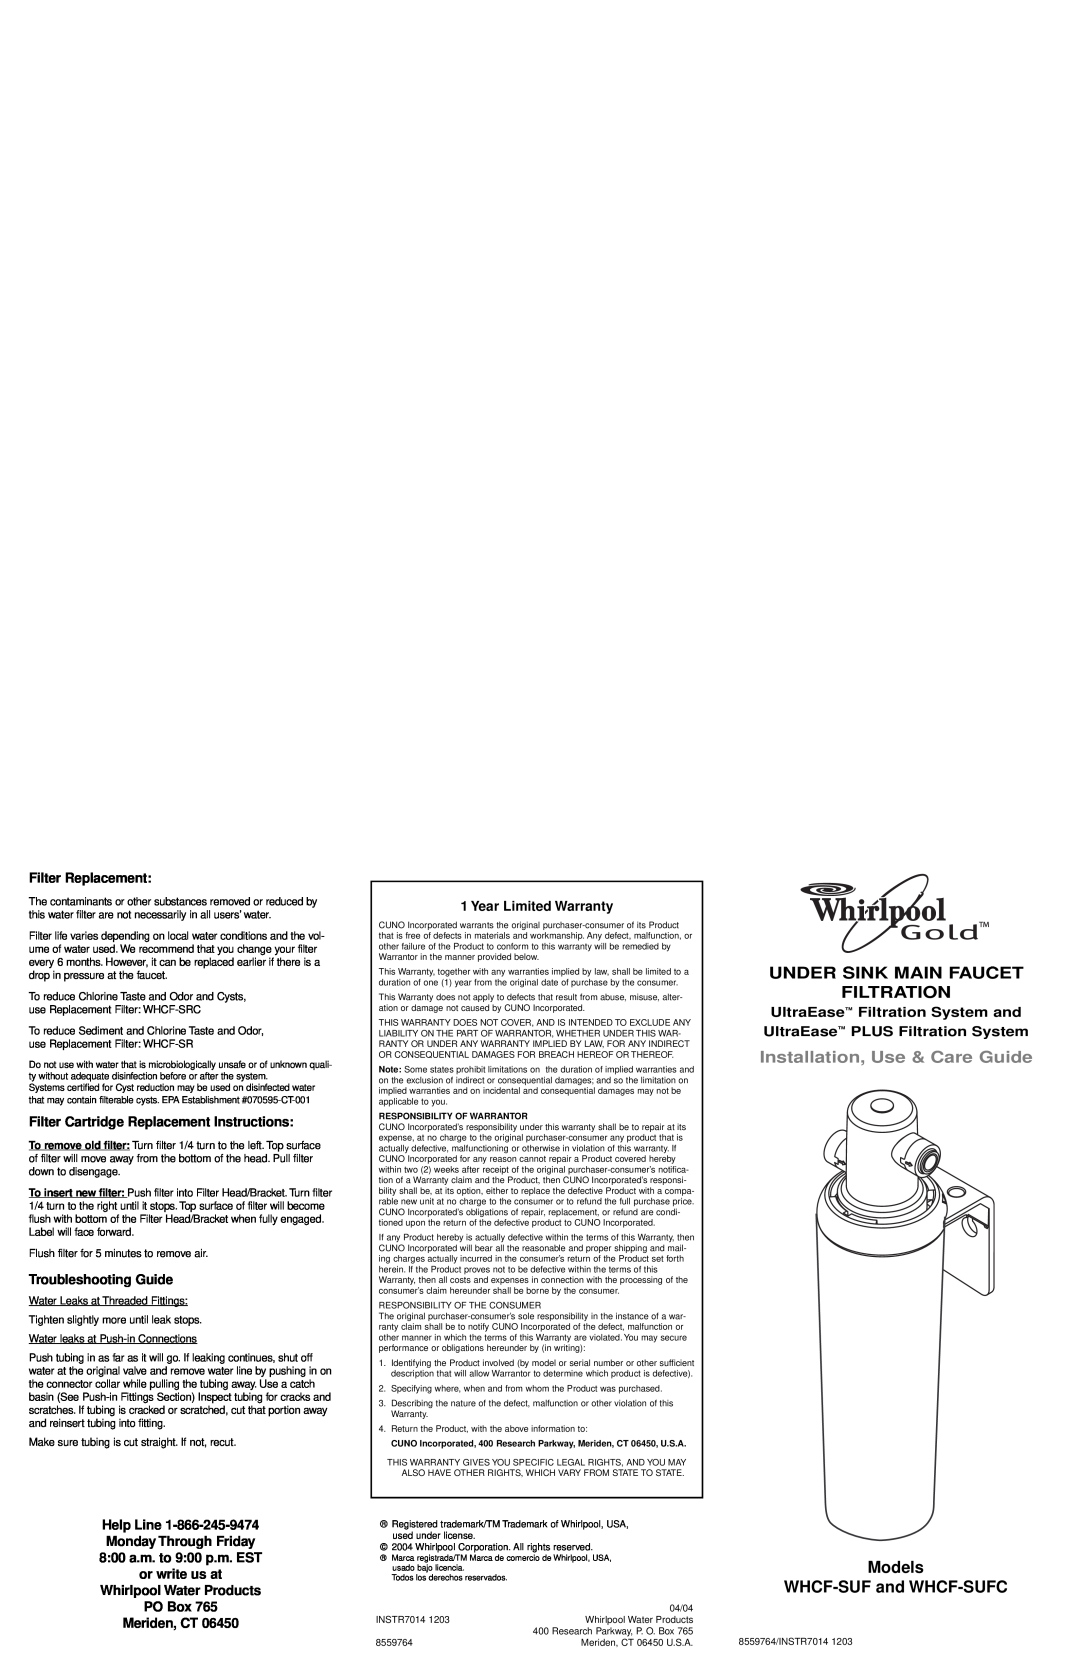 Whirlpool WHCF-SUFC installation instructions Under Sink Main Faucet Filtration, Installation, Use & Care Guide 